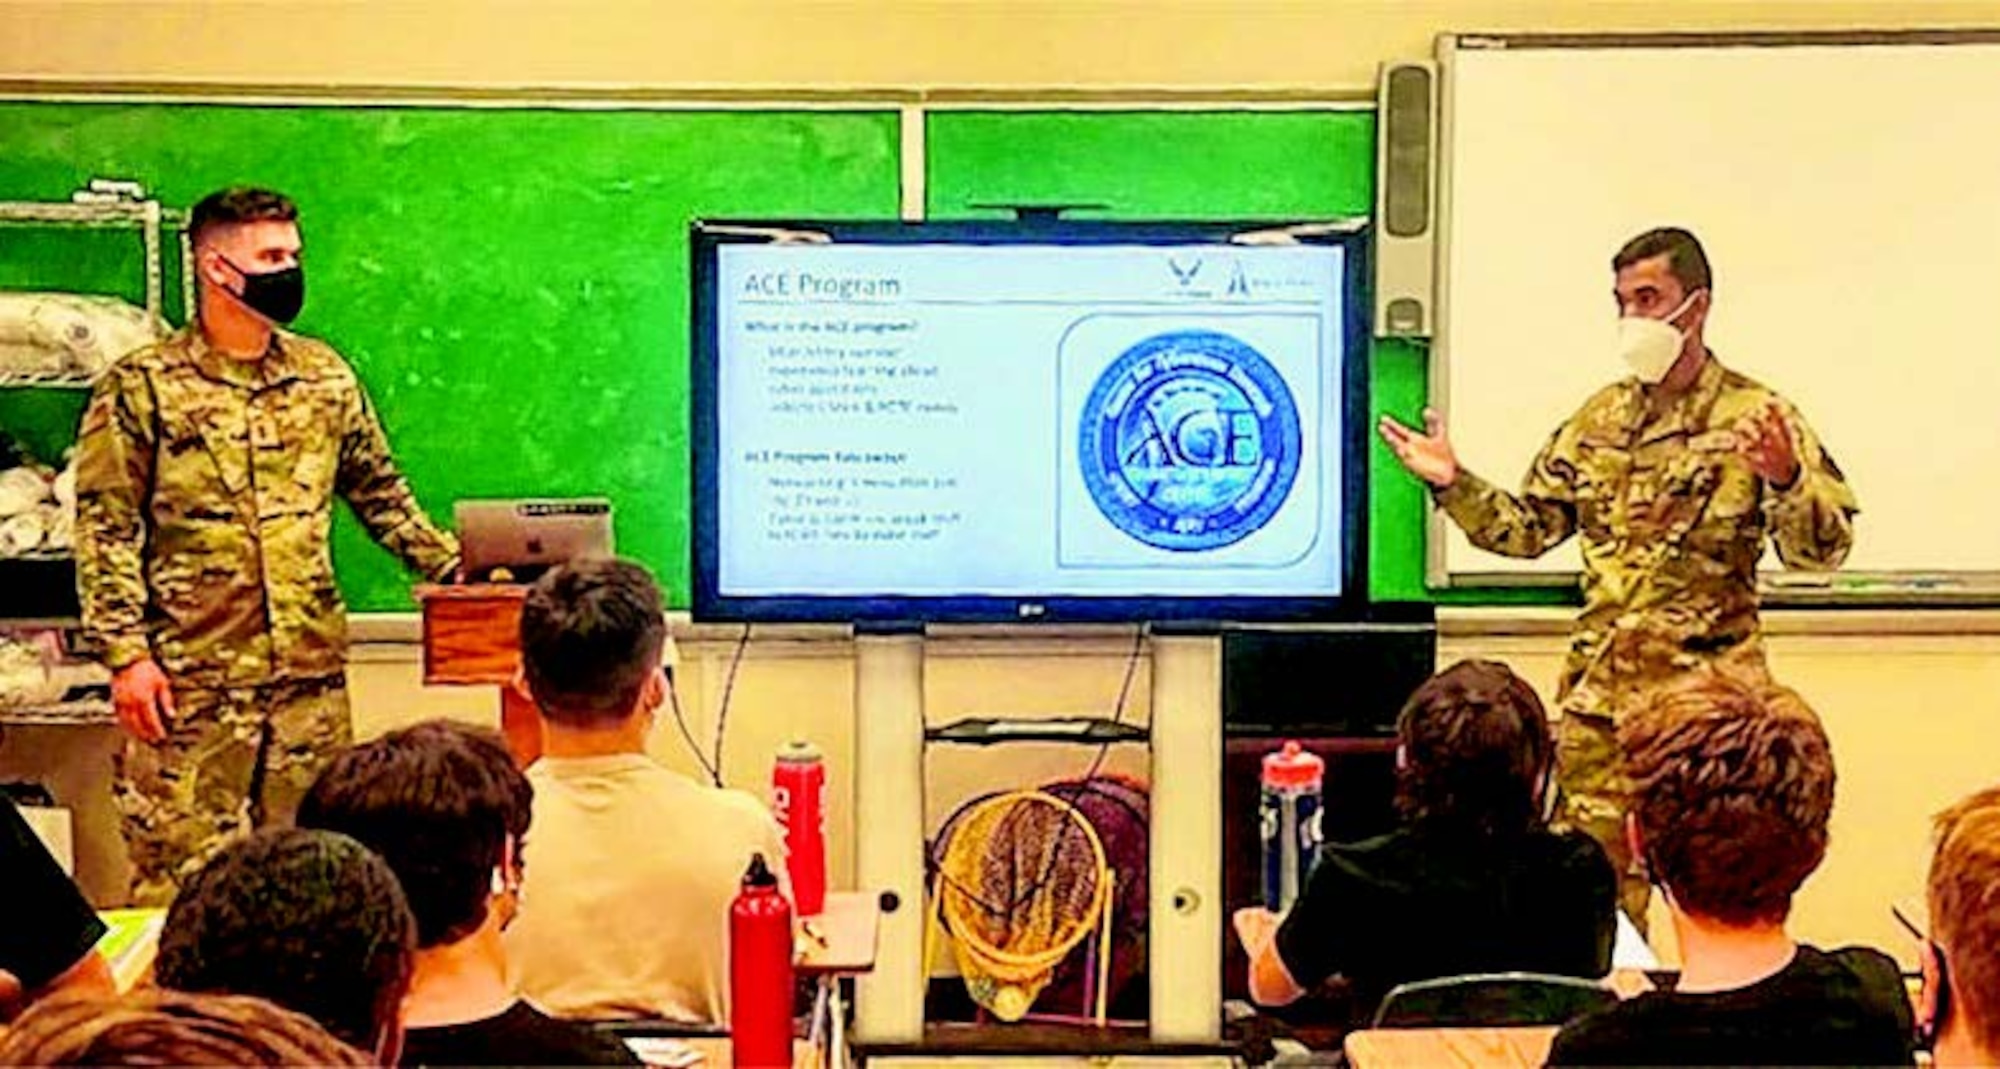 Tilak Bhatnagar (right) shared his experience in the ACE program to a group of Civil Air Patrol cadets in August.